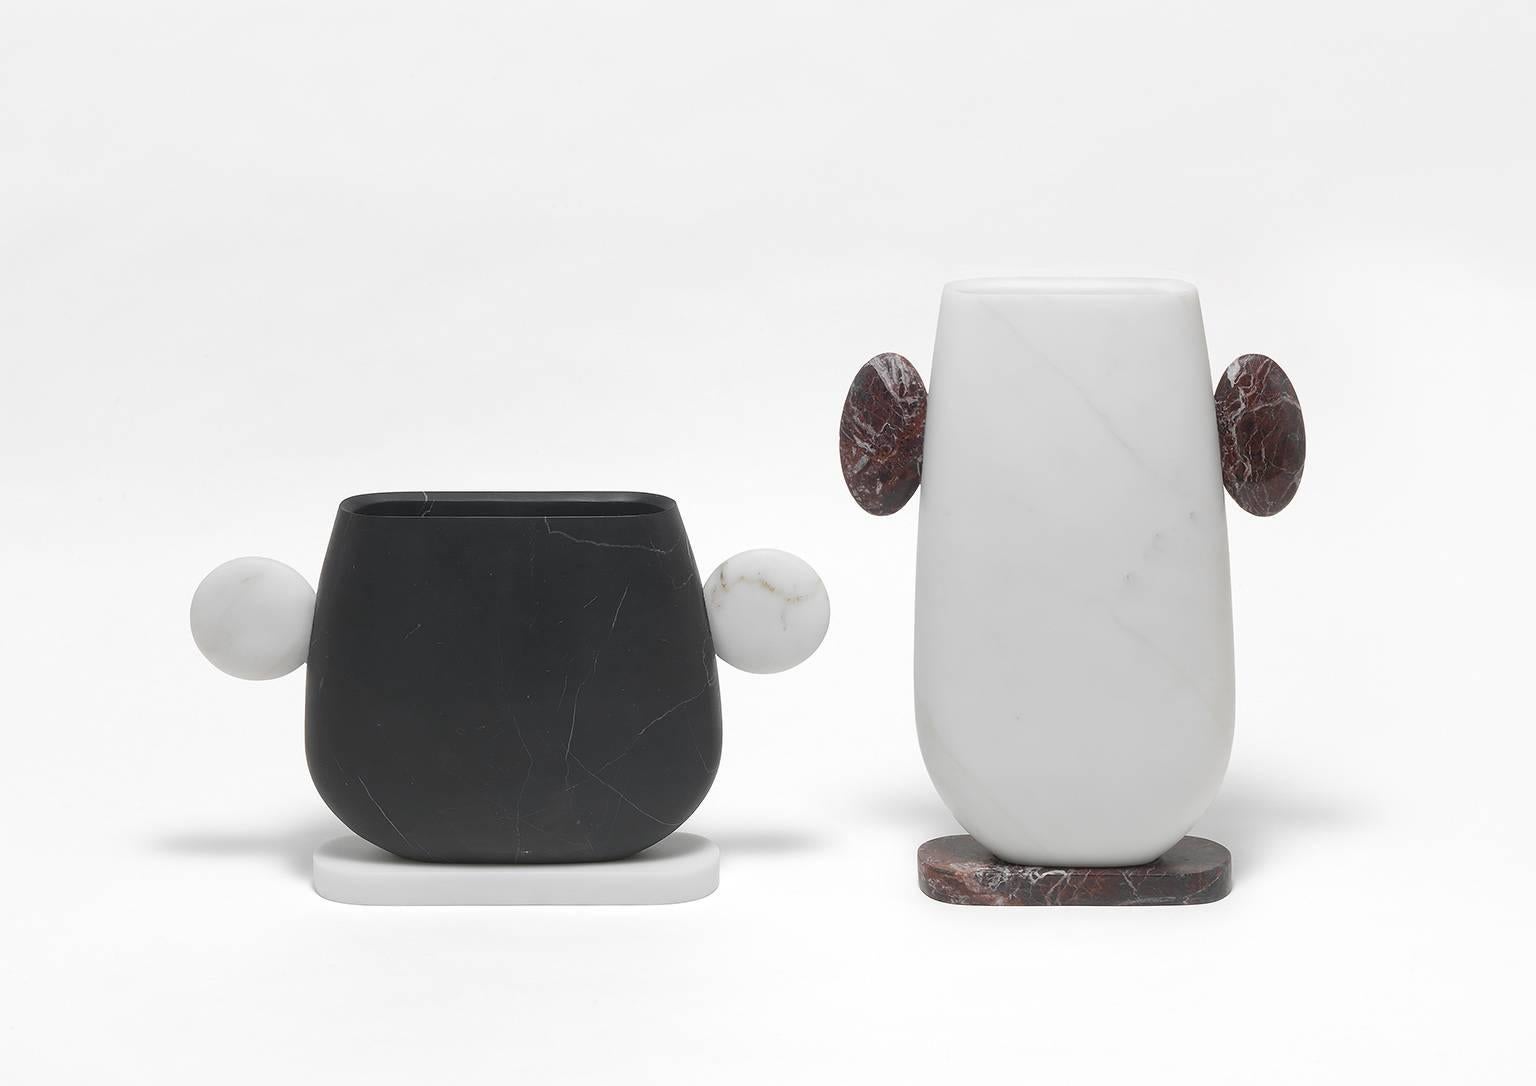 
Vase in black Marquinia, Red Levanto and white Michelangelo marble,
Size: 38.2 x 23.4 x 7.3 cm, smooth finishing. Commercial name: Tacca, Homage Collection by the Italian designer Matteo Cibic. Made in Italy, hand finished.
Originating in Carrara,